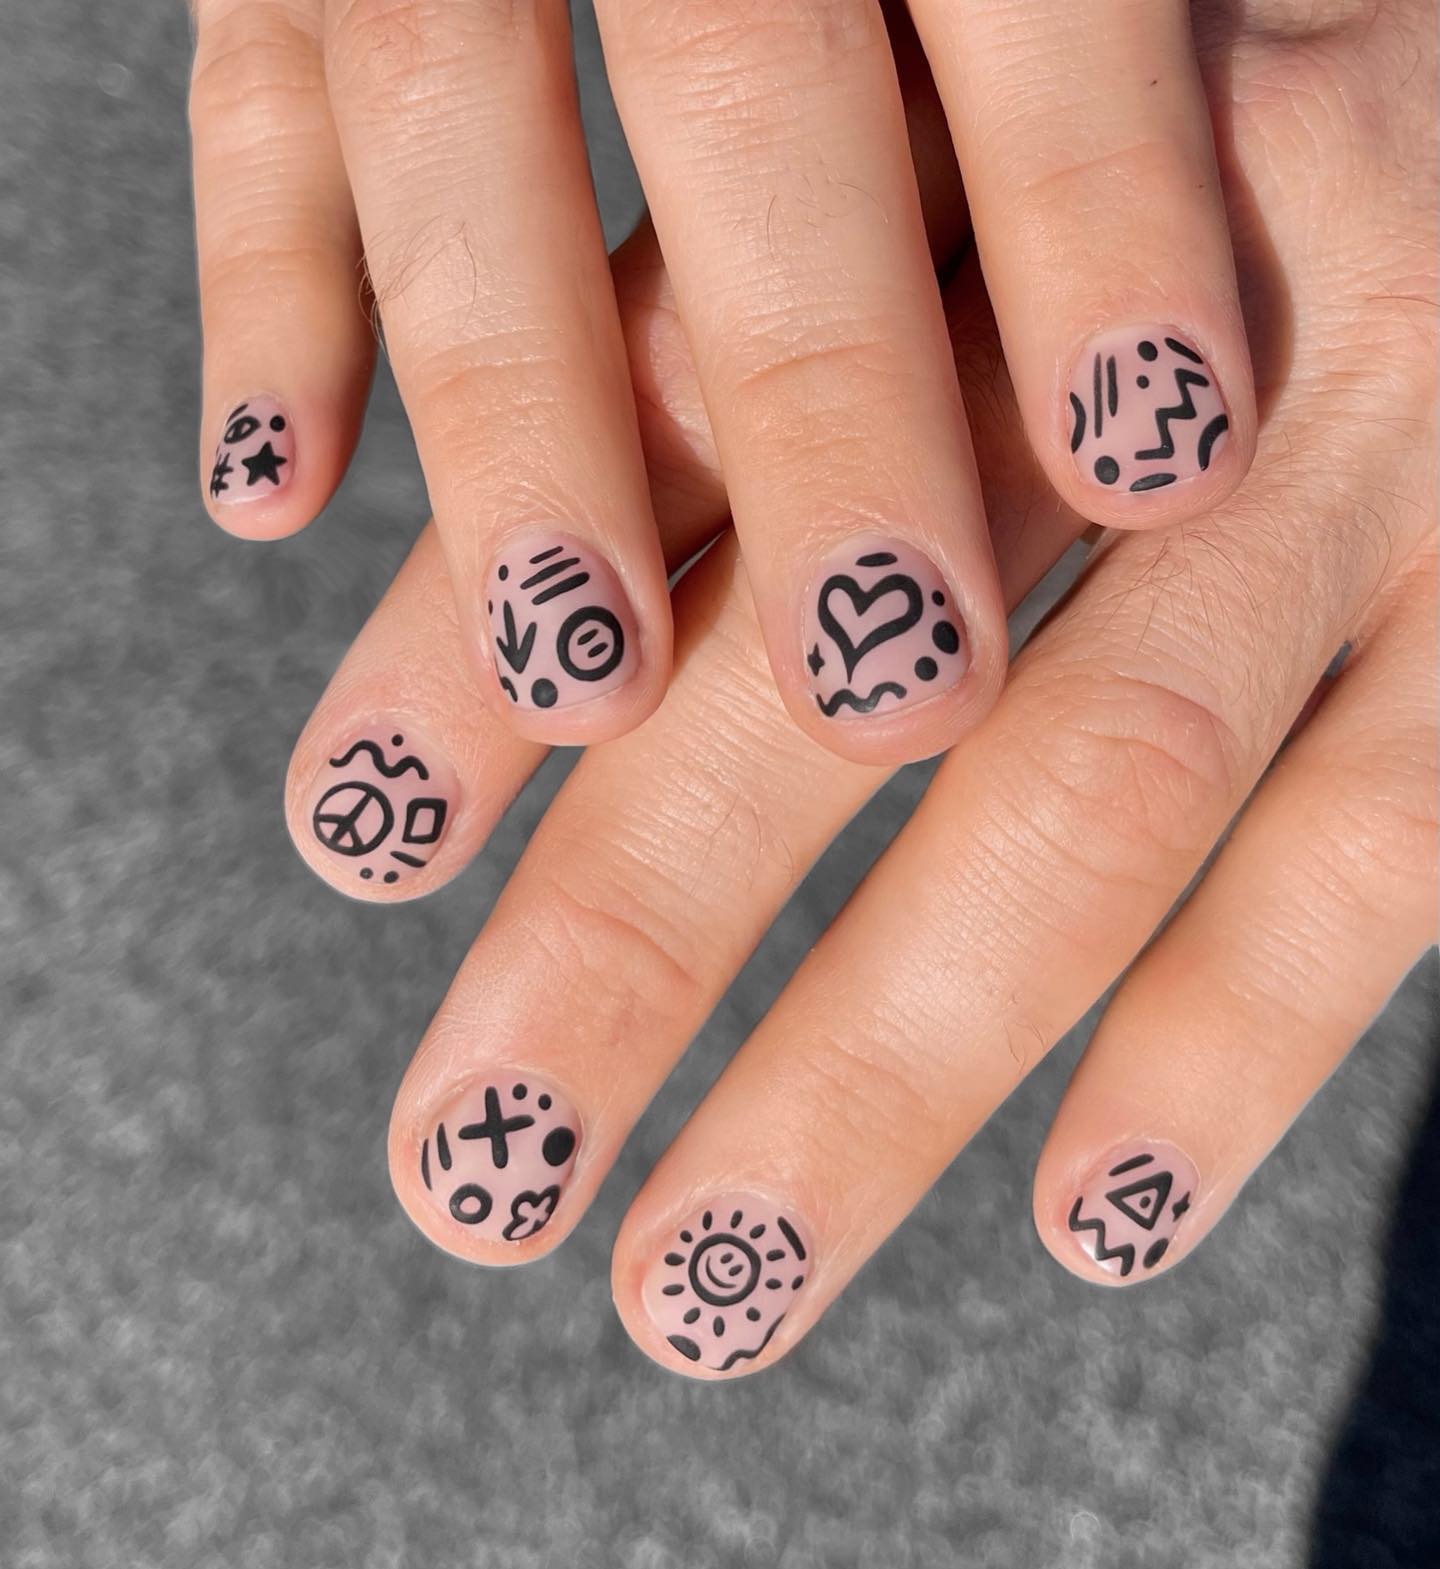 Doodle nail art is exactly what it sounds like: nail art that is based on doodles. It can be as simple as a little doodle on one nail, or it can be a full-on masterpiece that takes all of your nails!